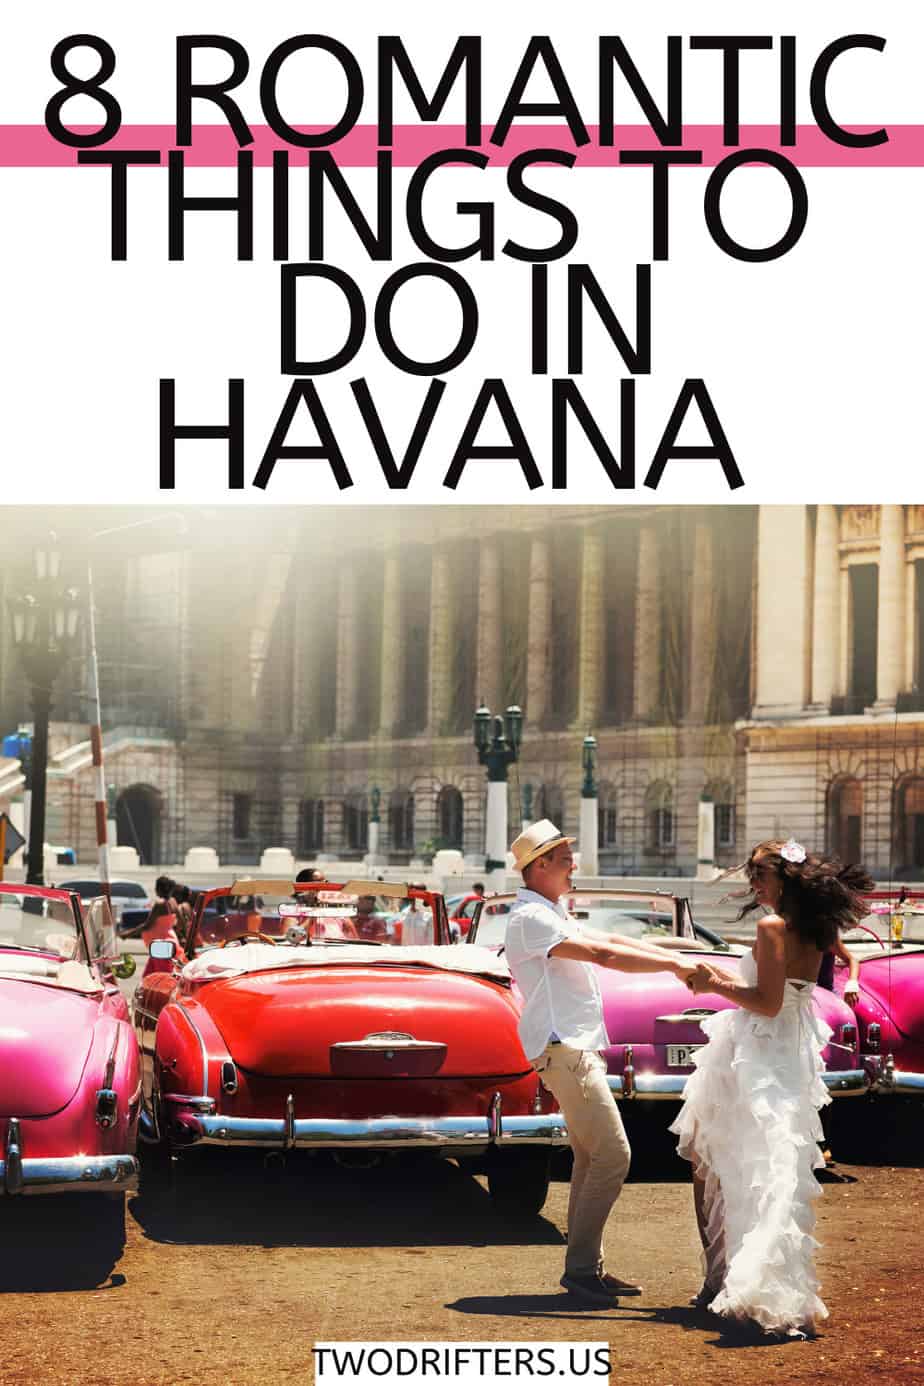 Pinterest social share image that says "8 Romantic Things to do in Havana."